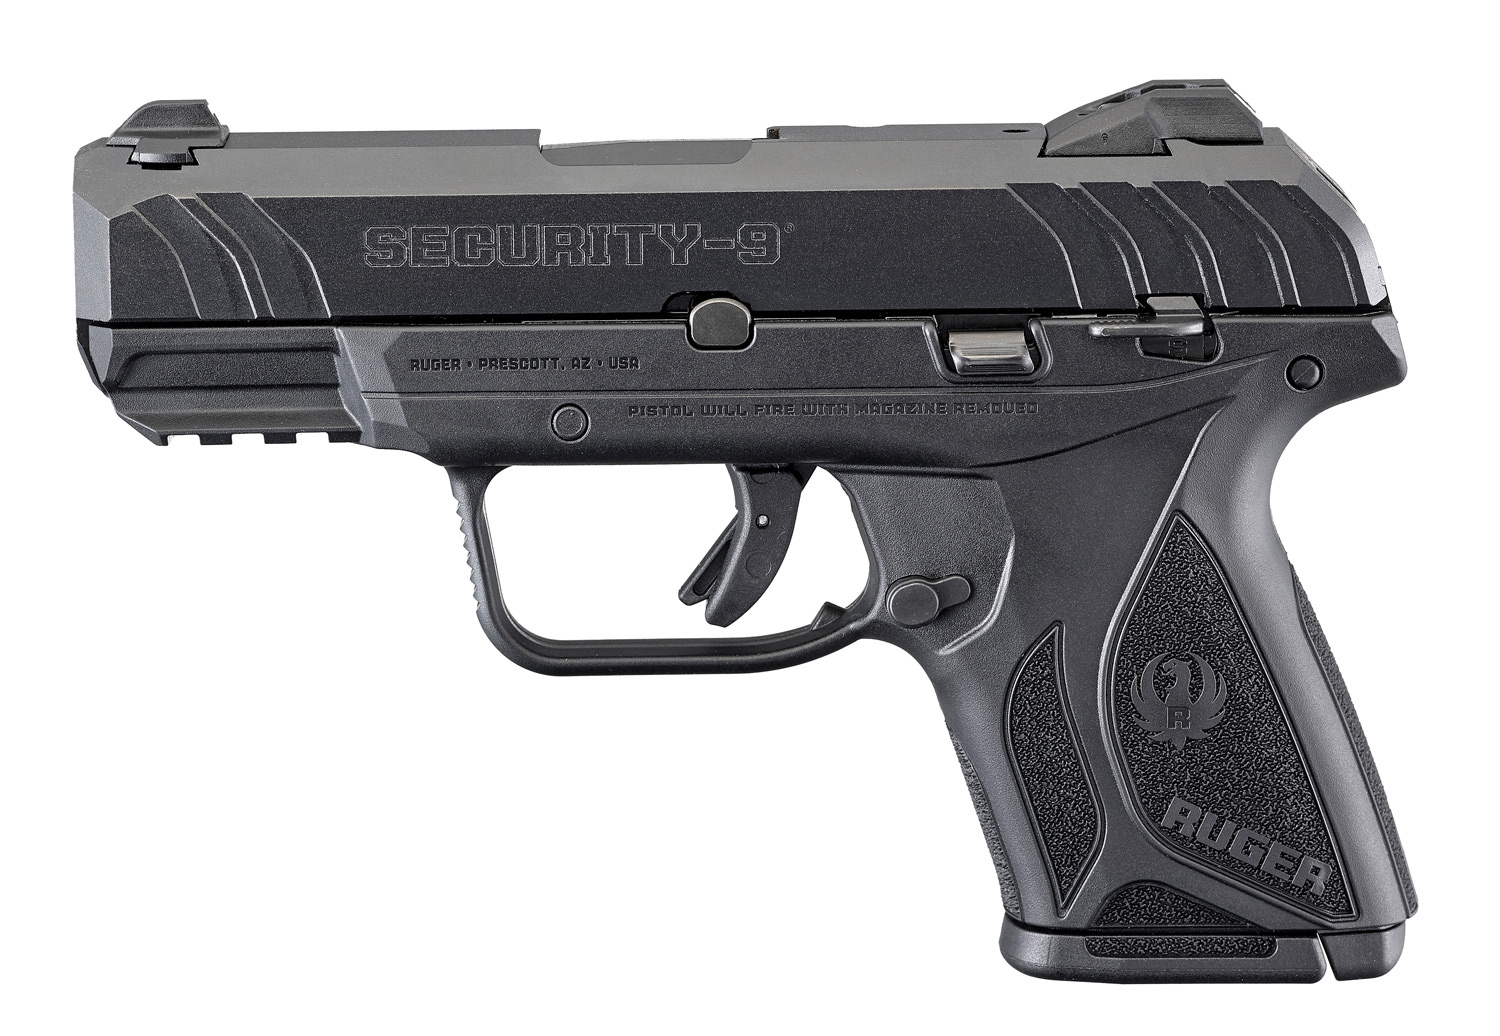 Ruger Security-9 Compact, 10 Round Semi-Auto Pistol, 9mm